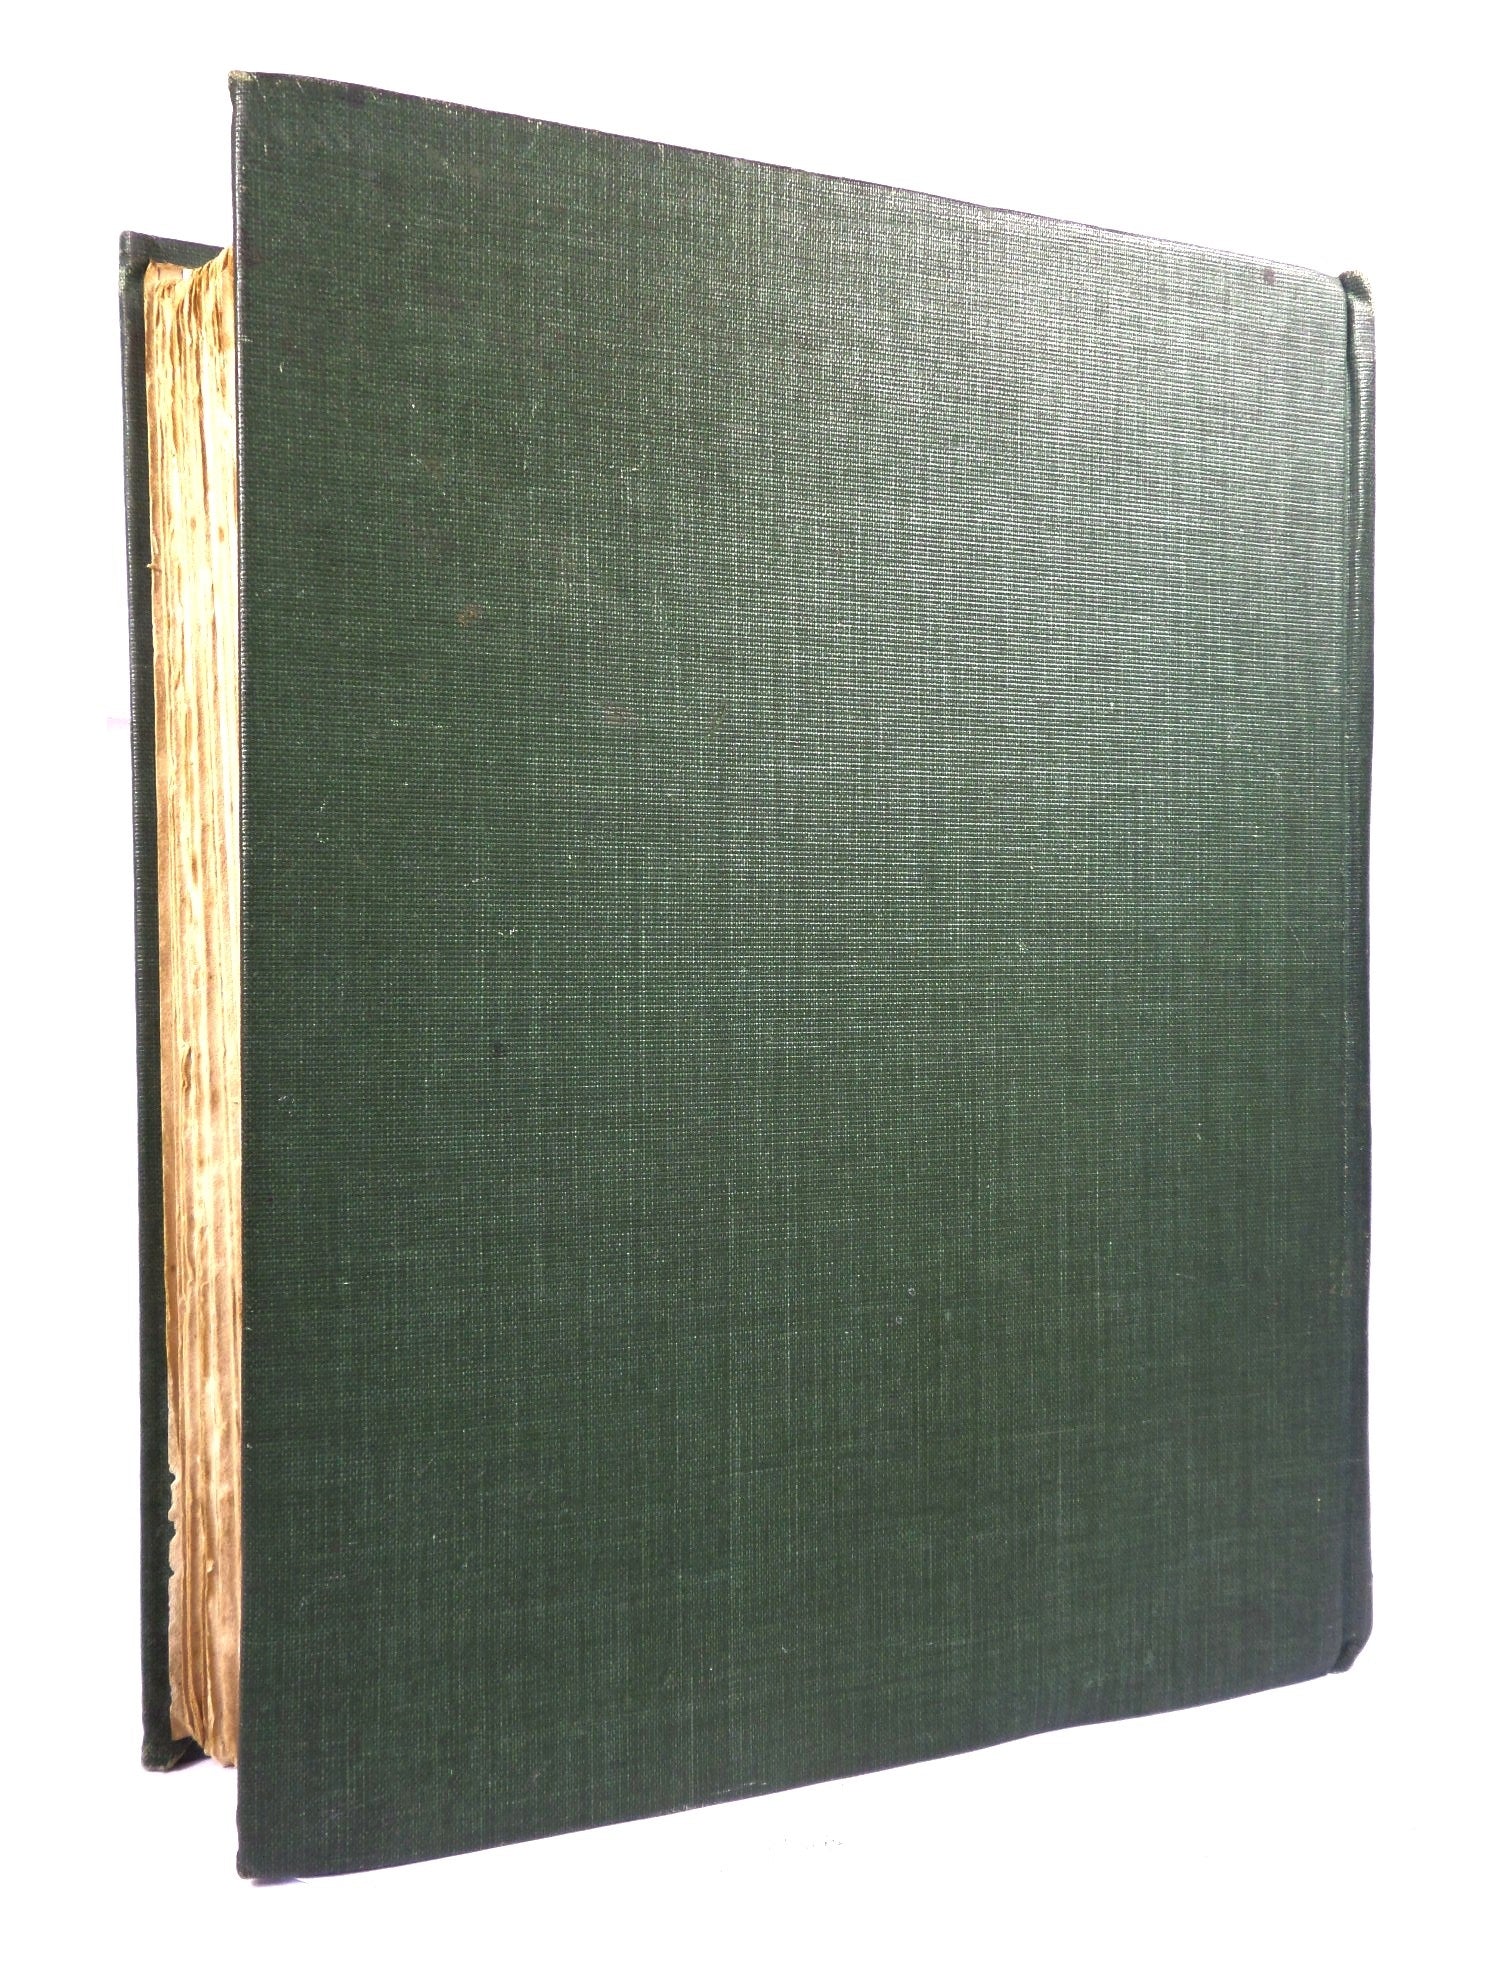 THE GOLF COURSES OF THE BRITISH ISLES BY BERNARD DARWIN 1910 FIRST EDITION